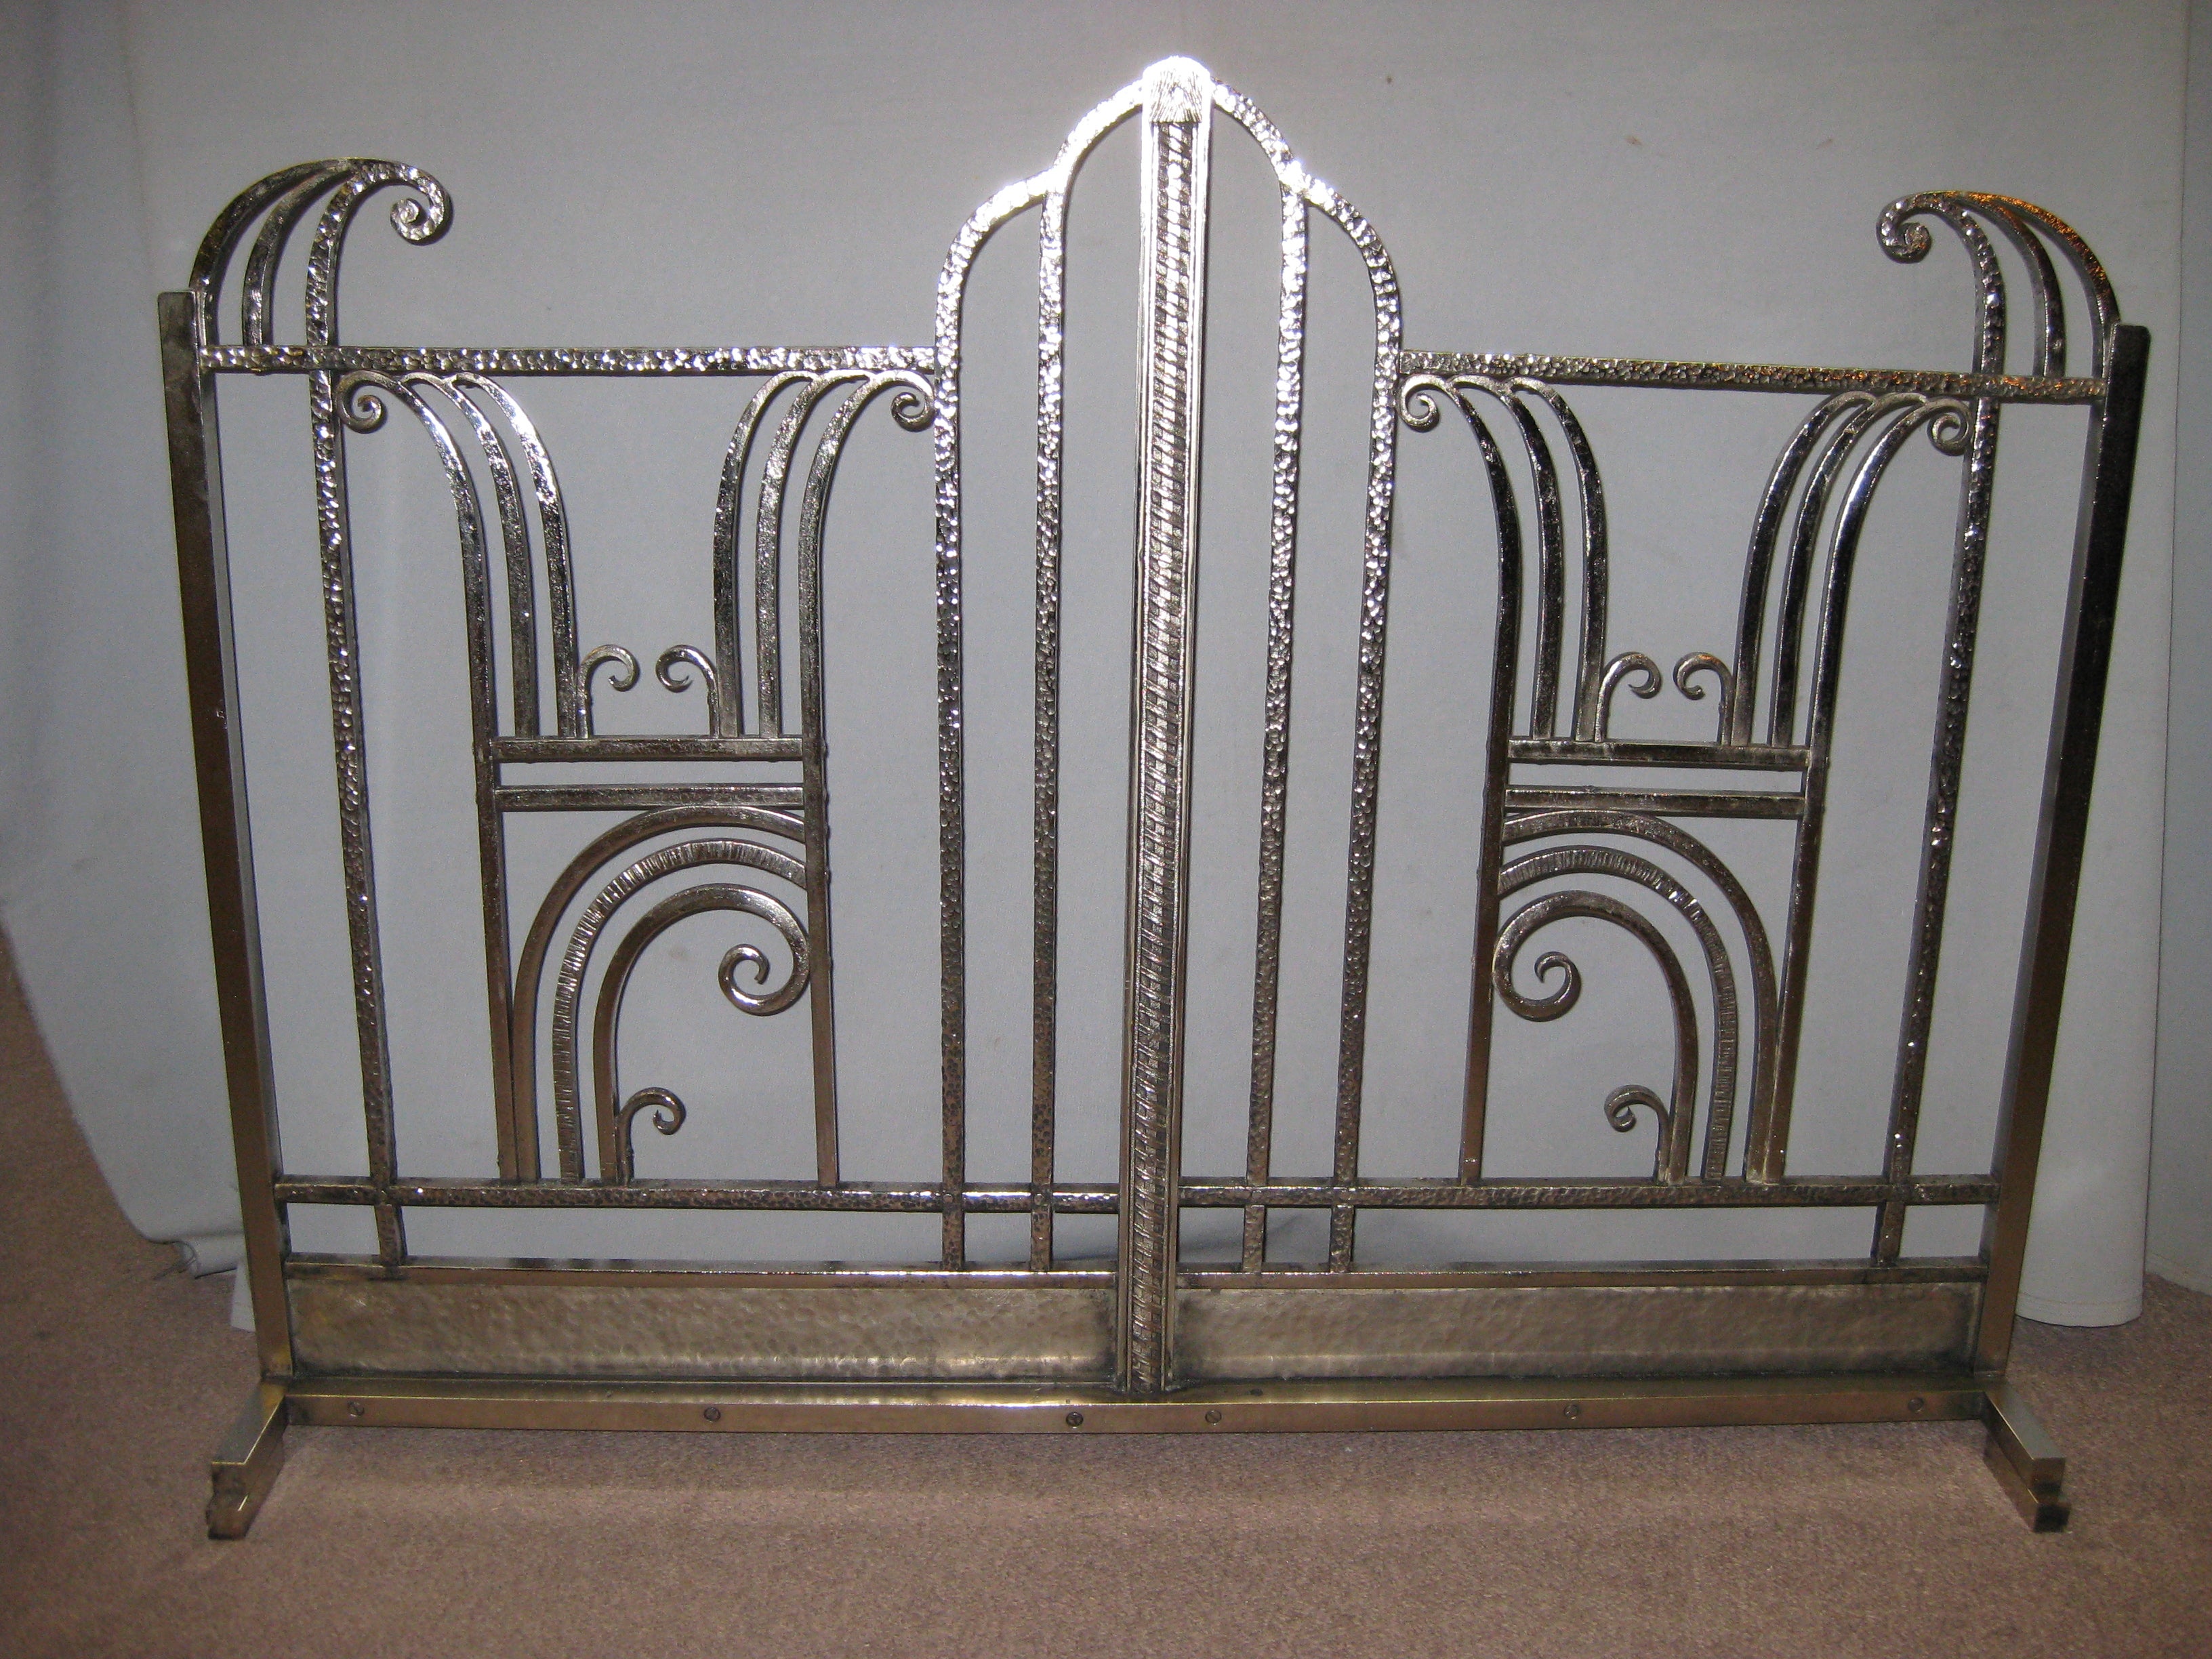 French Art Deco hand forged iron fire screen - Charles Piguet 1925